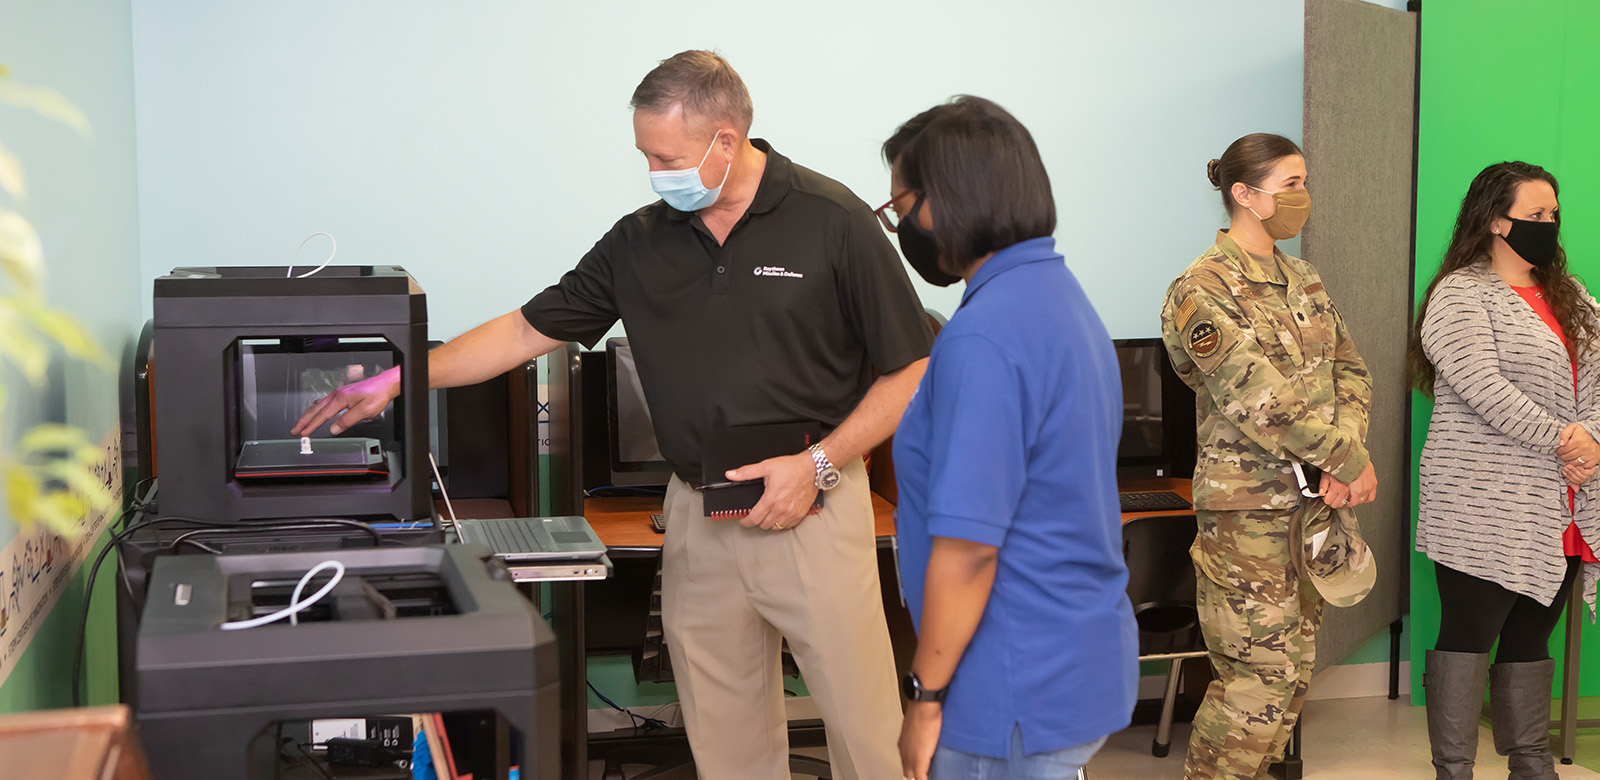 Jon Norman, who leads customer requirements and capabilities for Air Power at Raytheon Missiles & Defense, examines a 3D printer at the Eglin Air Force Base Youth Center in Florida. The company visited the center and donated supplies to support its gradual reopening amid the coronavirus pandemic.